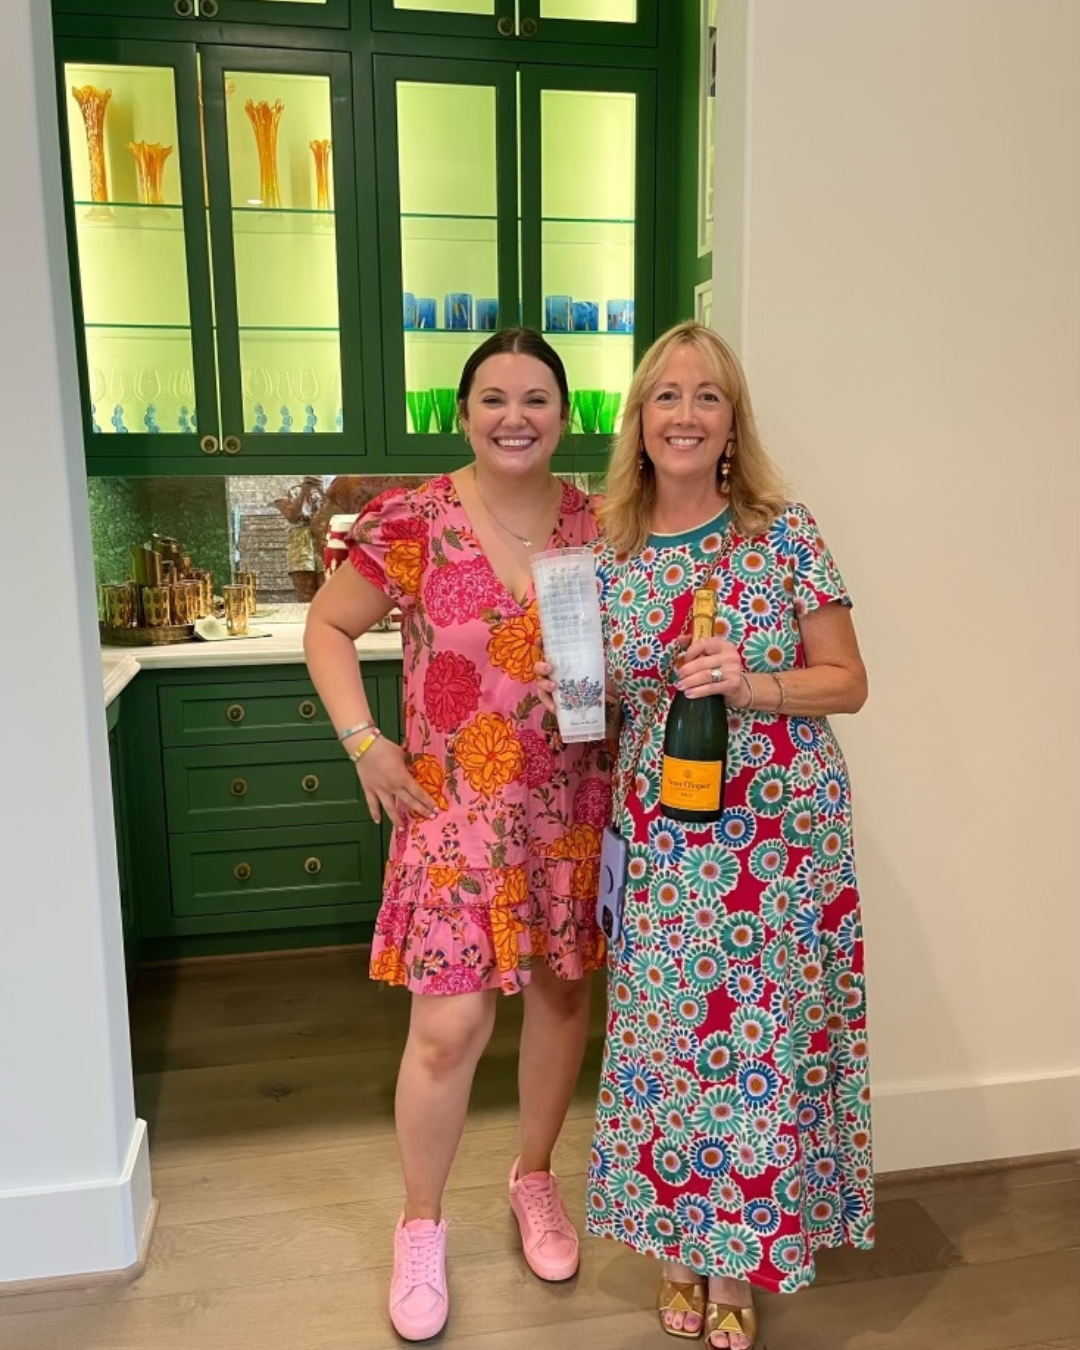 Two interior designers celebrate a successful install with champagne